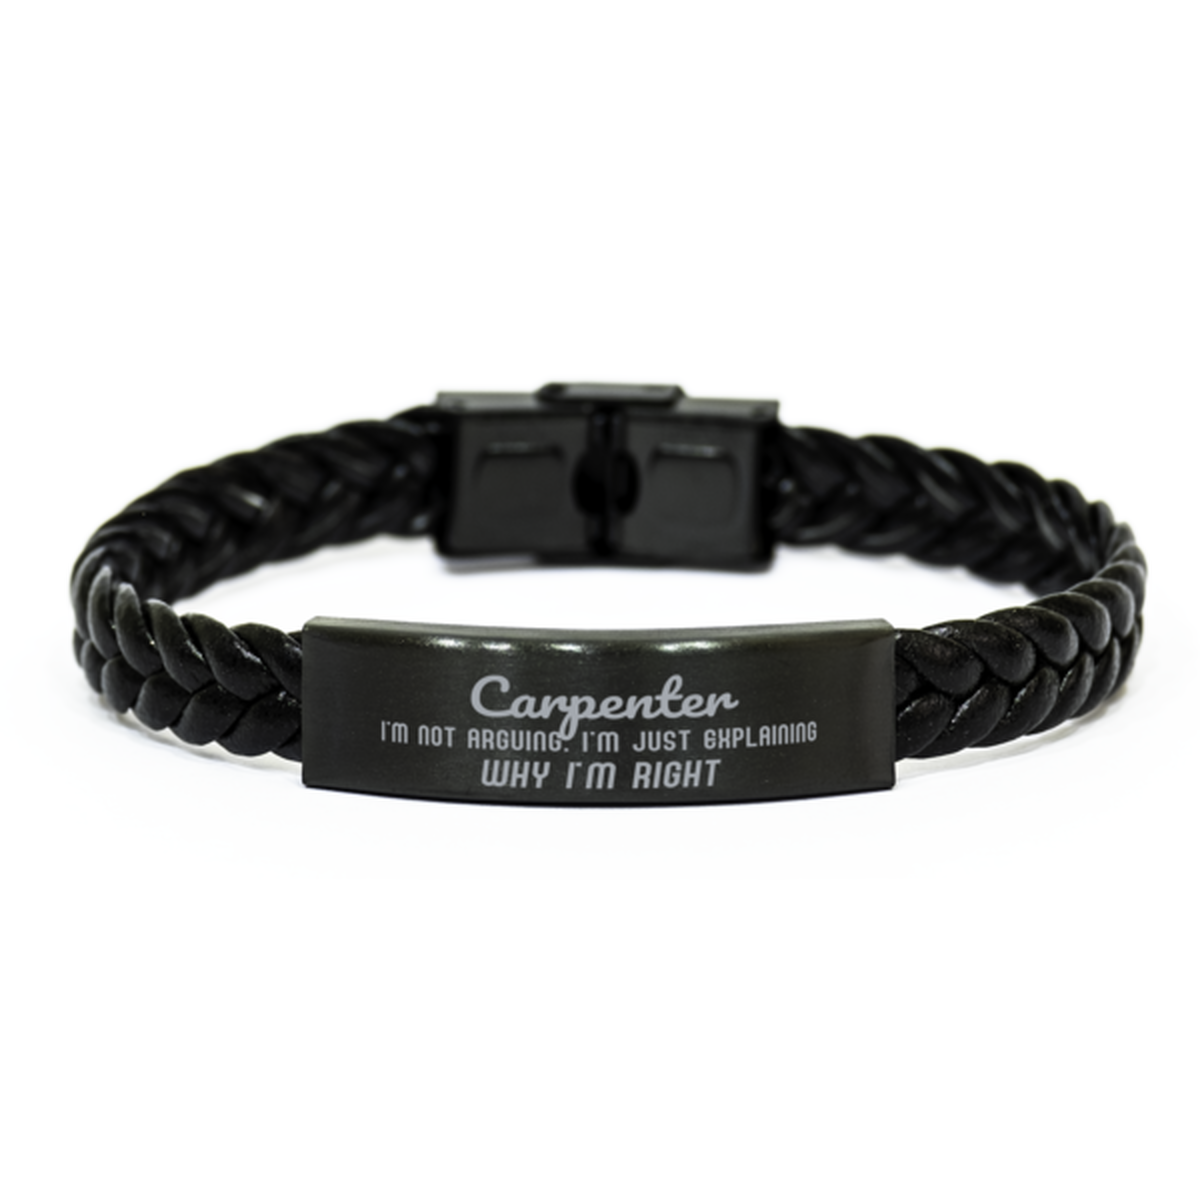 Carpenter I'm not Arguing. I'm Just Explaining Why I'm RIGHT Braided Leather Bracelet, Graduation Birthday Christmas Carpenter Gifts For Carpenter Funny Saying Quote Present for Men Women Coworker